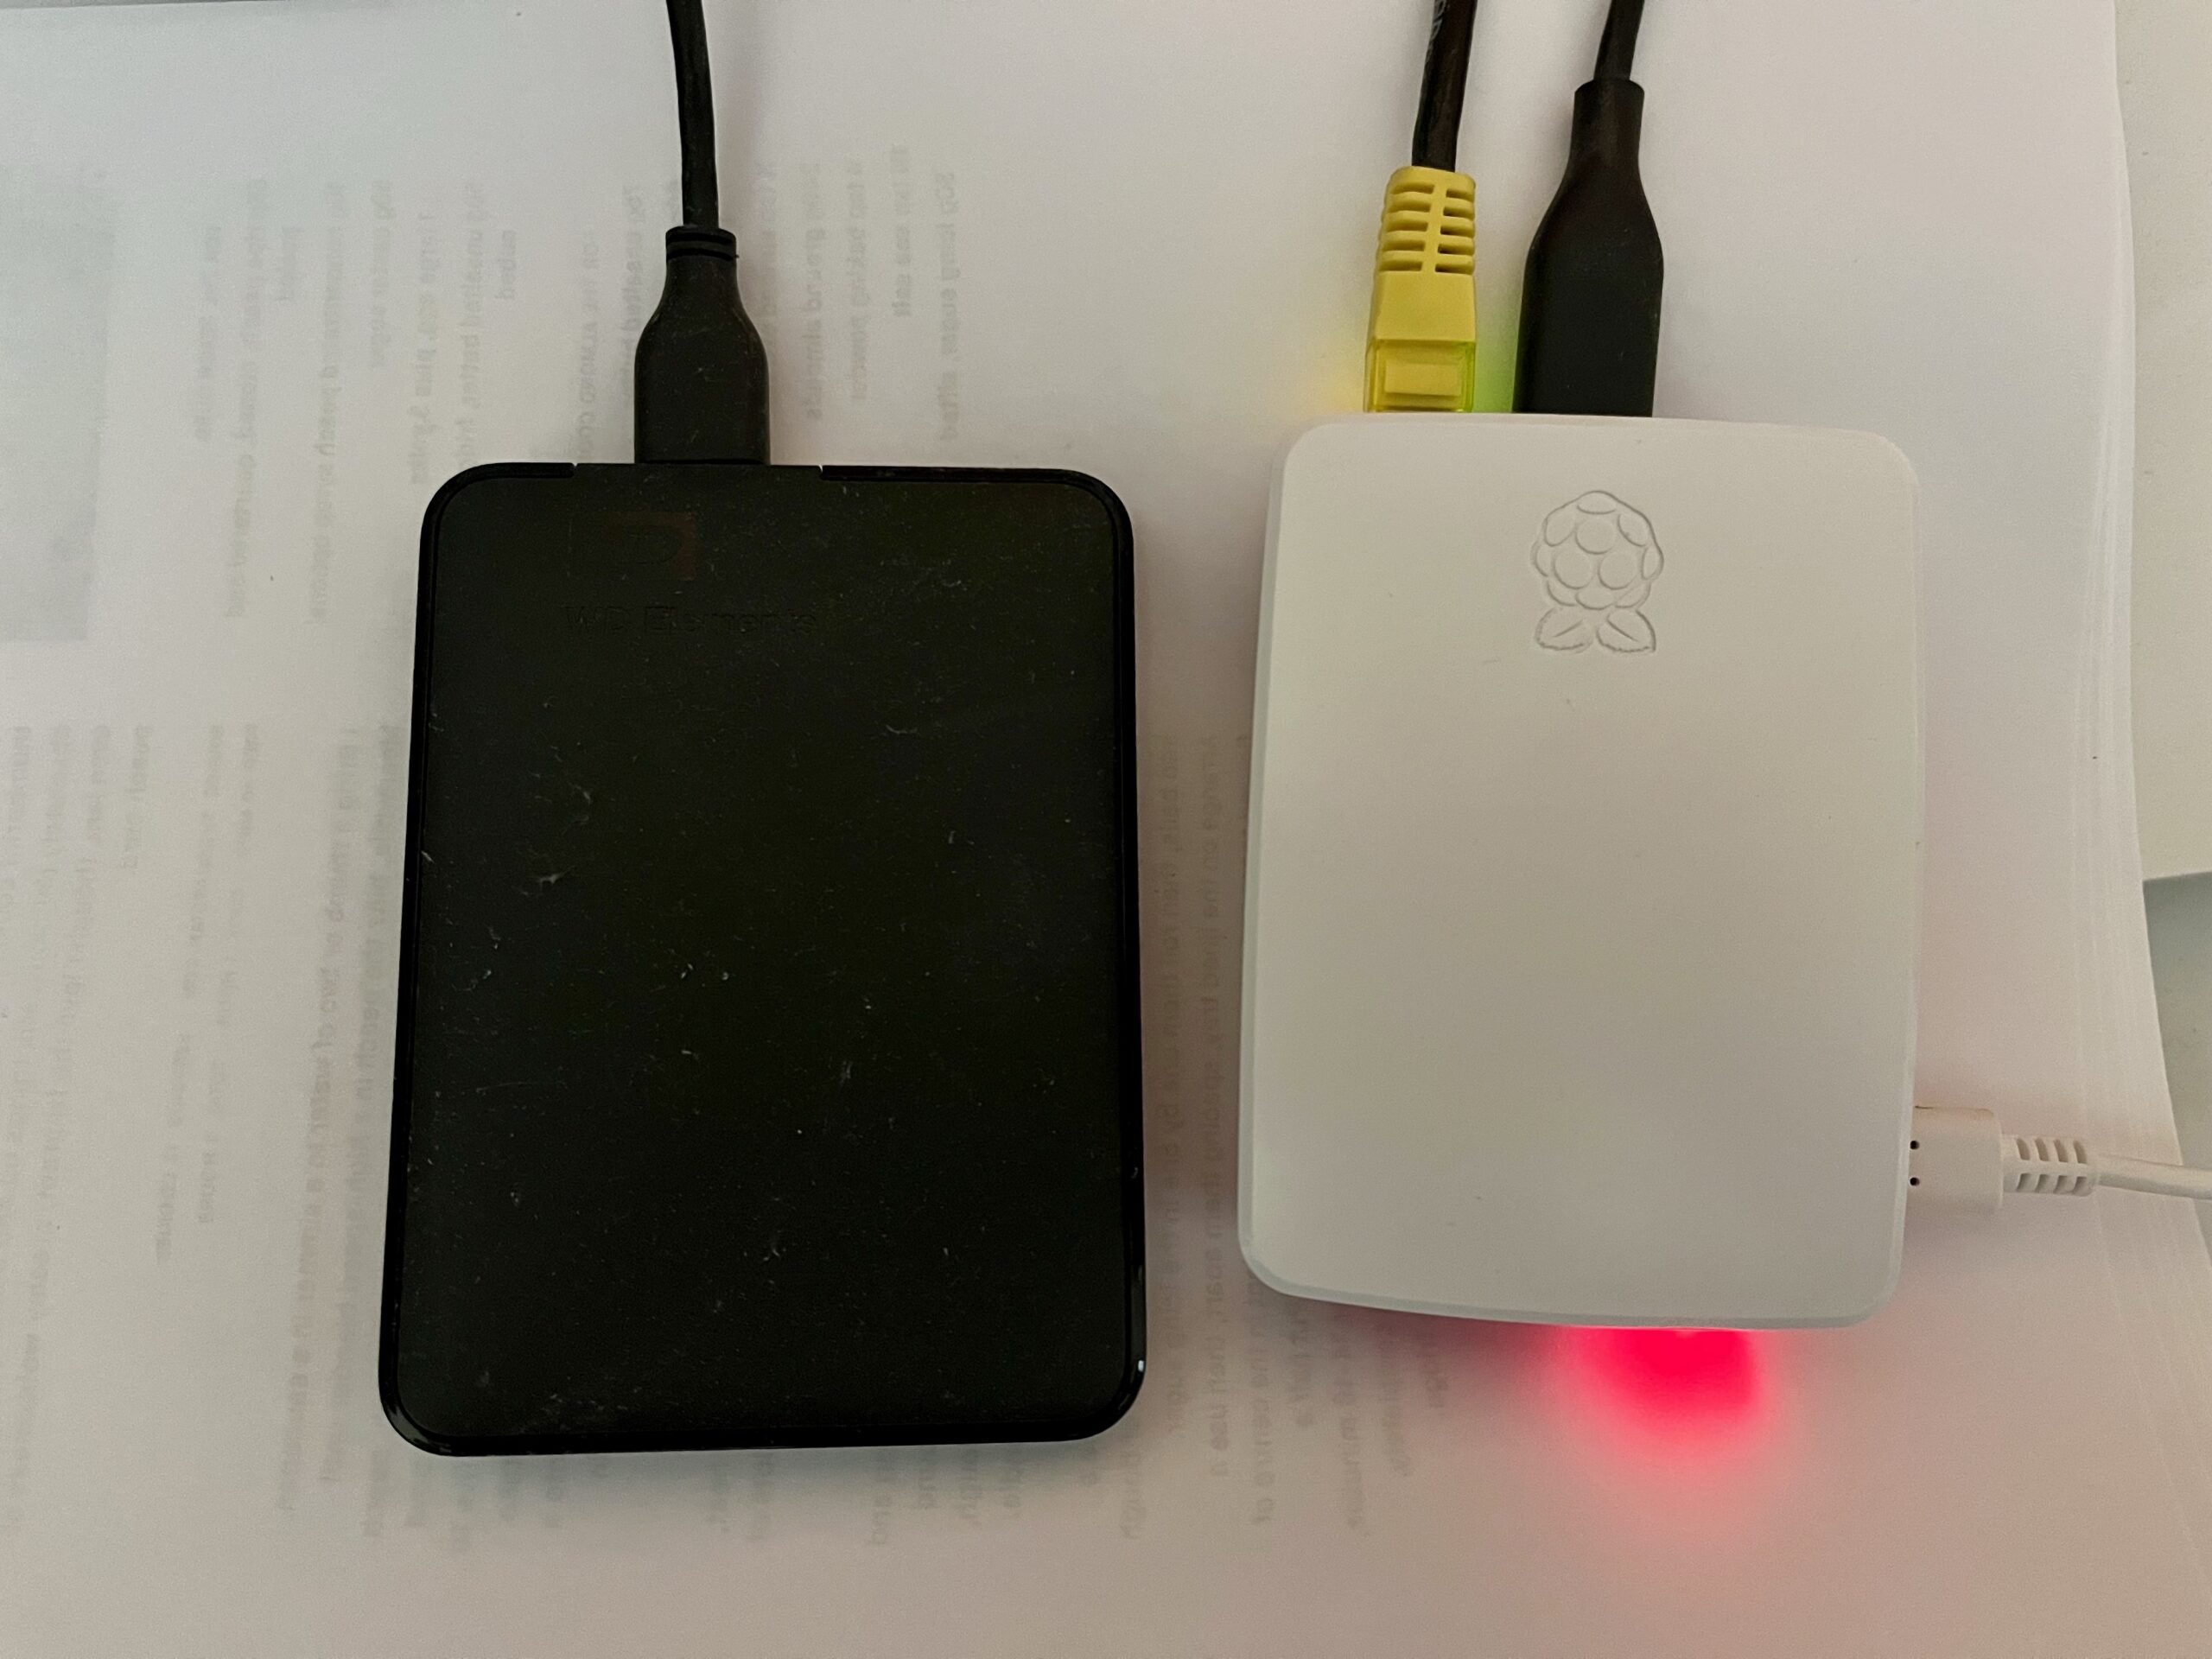 A photo of a Raspberry Pi 4 connected to a USB external hard drive